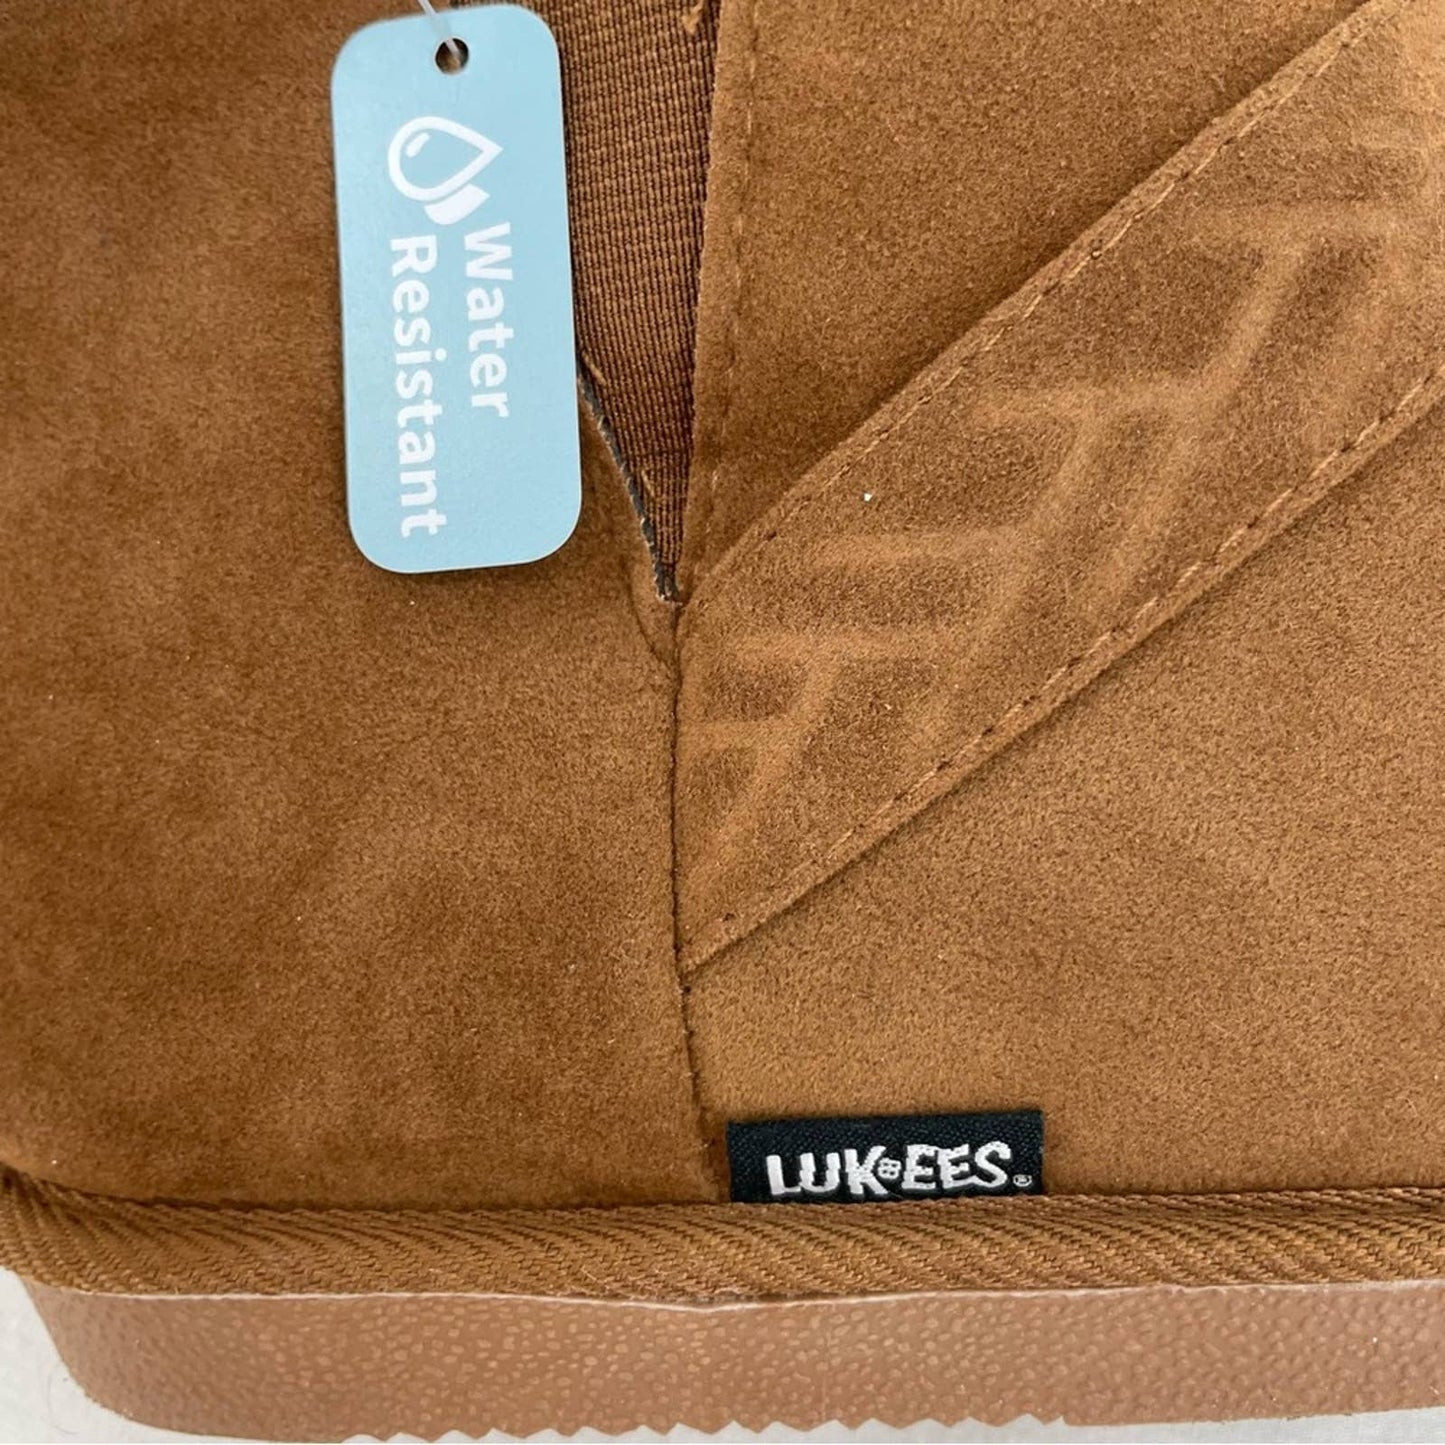 NWT Lukees by Muk Luks Harleen Low Ankle Booties Camel Tan Faux Suede Slippers Size 8